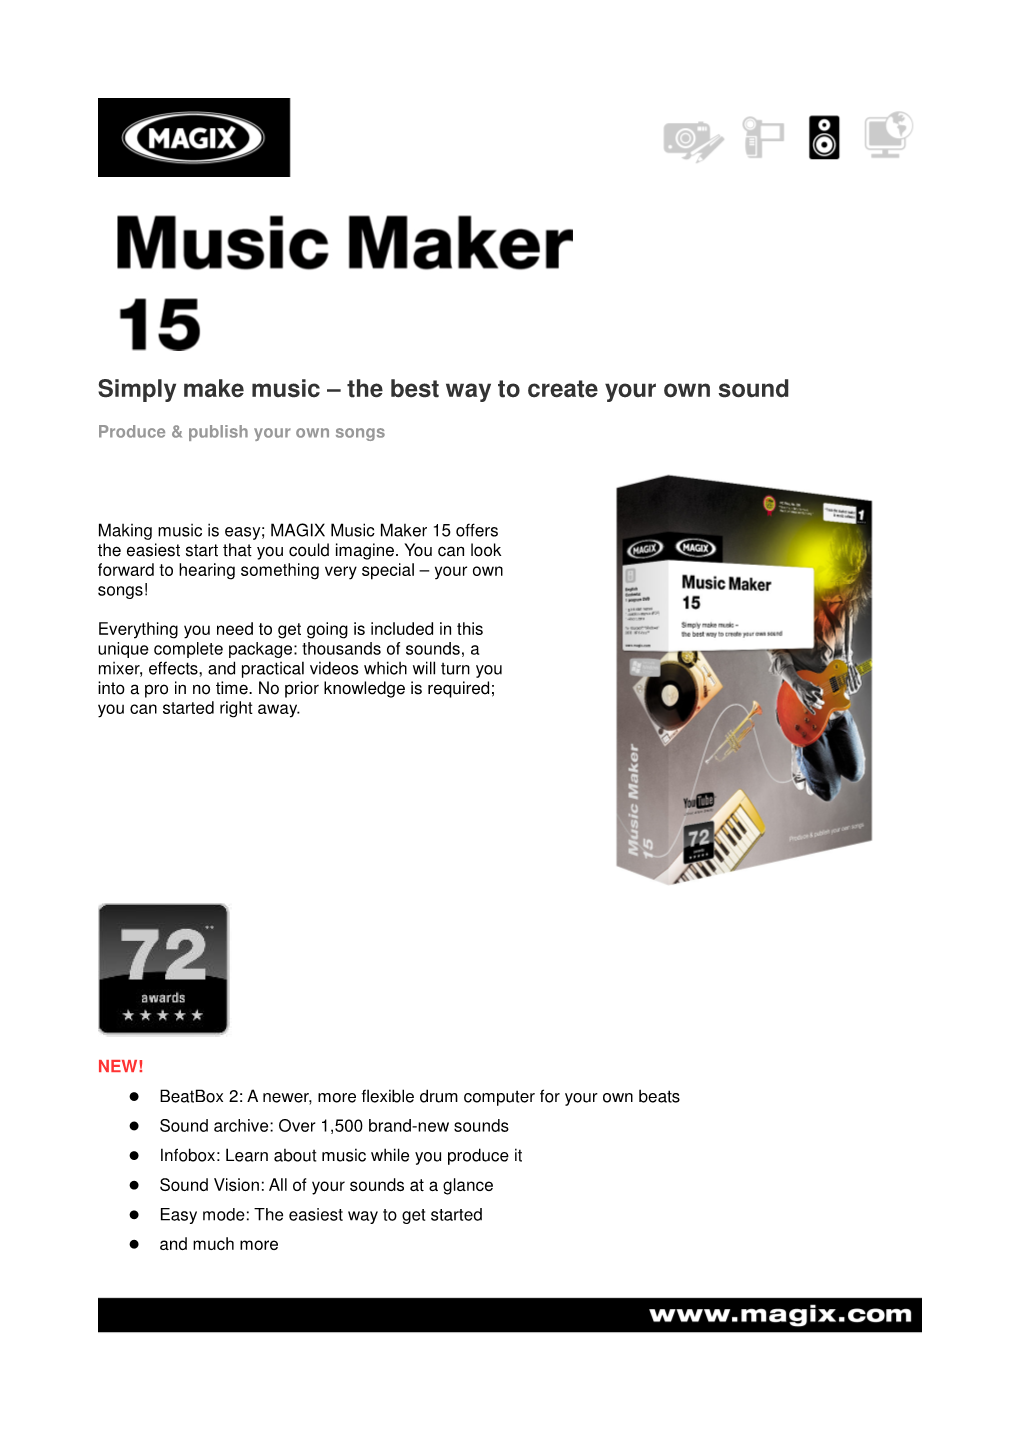 Simply Make Music – the Best Way to Create Your Own Sound